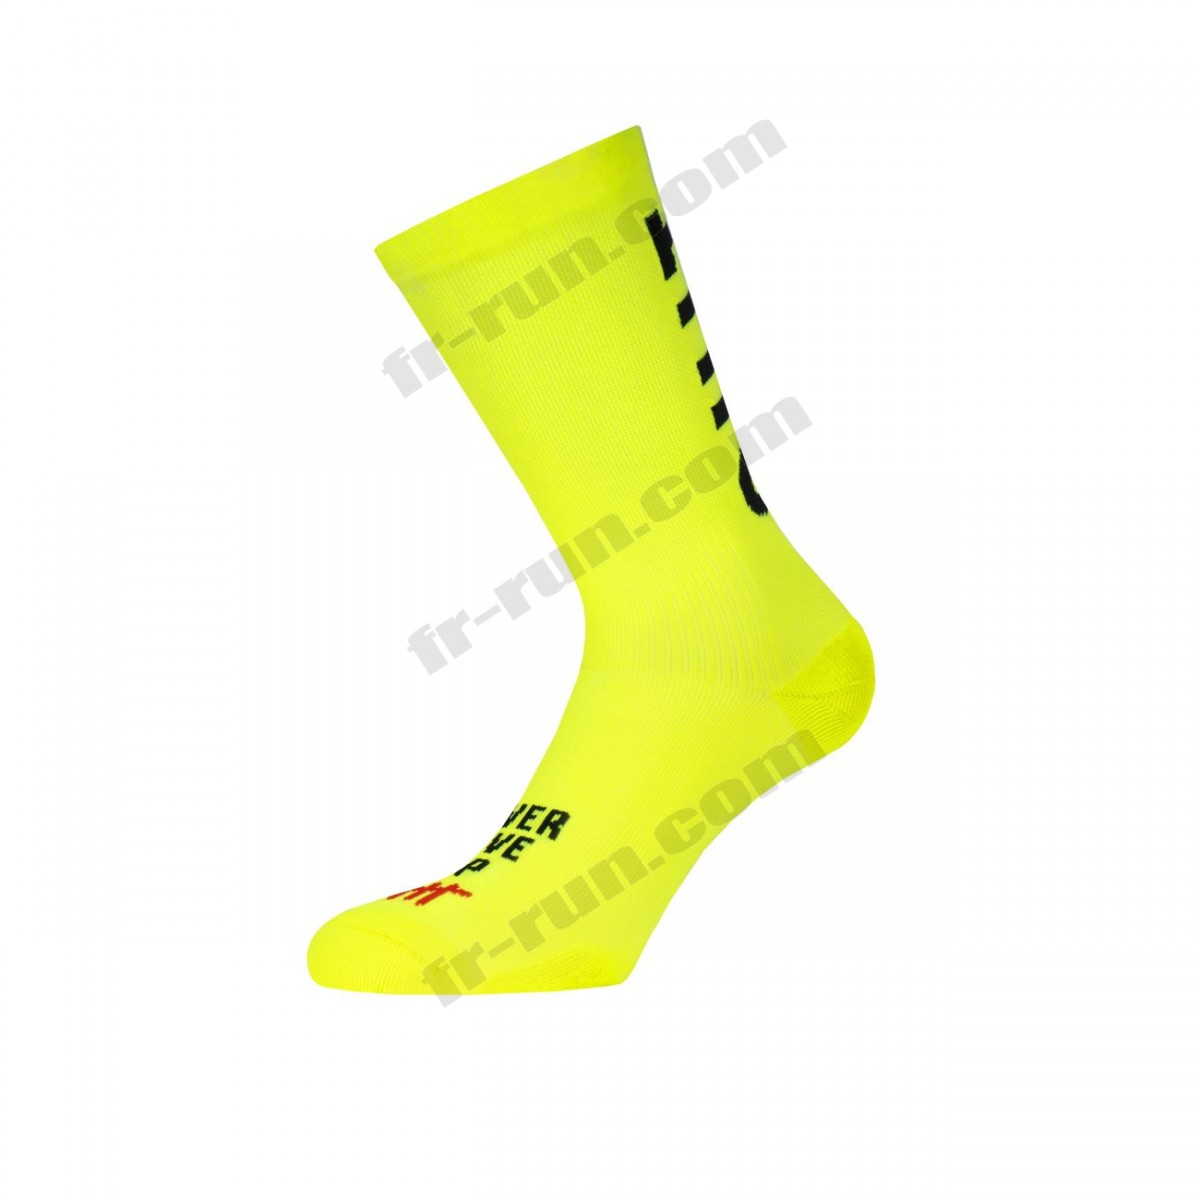 Pacific And Co/running adulte PACIFIC and CO DON'T QUIT Unisex Performance Socks ◇◇◇ Pas Cher Du Tout - Pacific And Co/running adulte PACIFIC and CO DON'T QUIT Unisex Performance Socks ◇◇◇ Pas Cher Du Tout